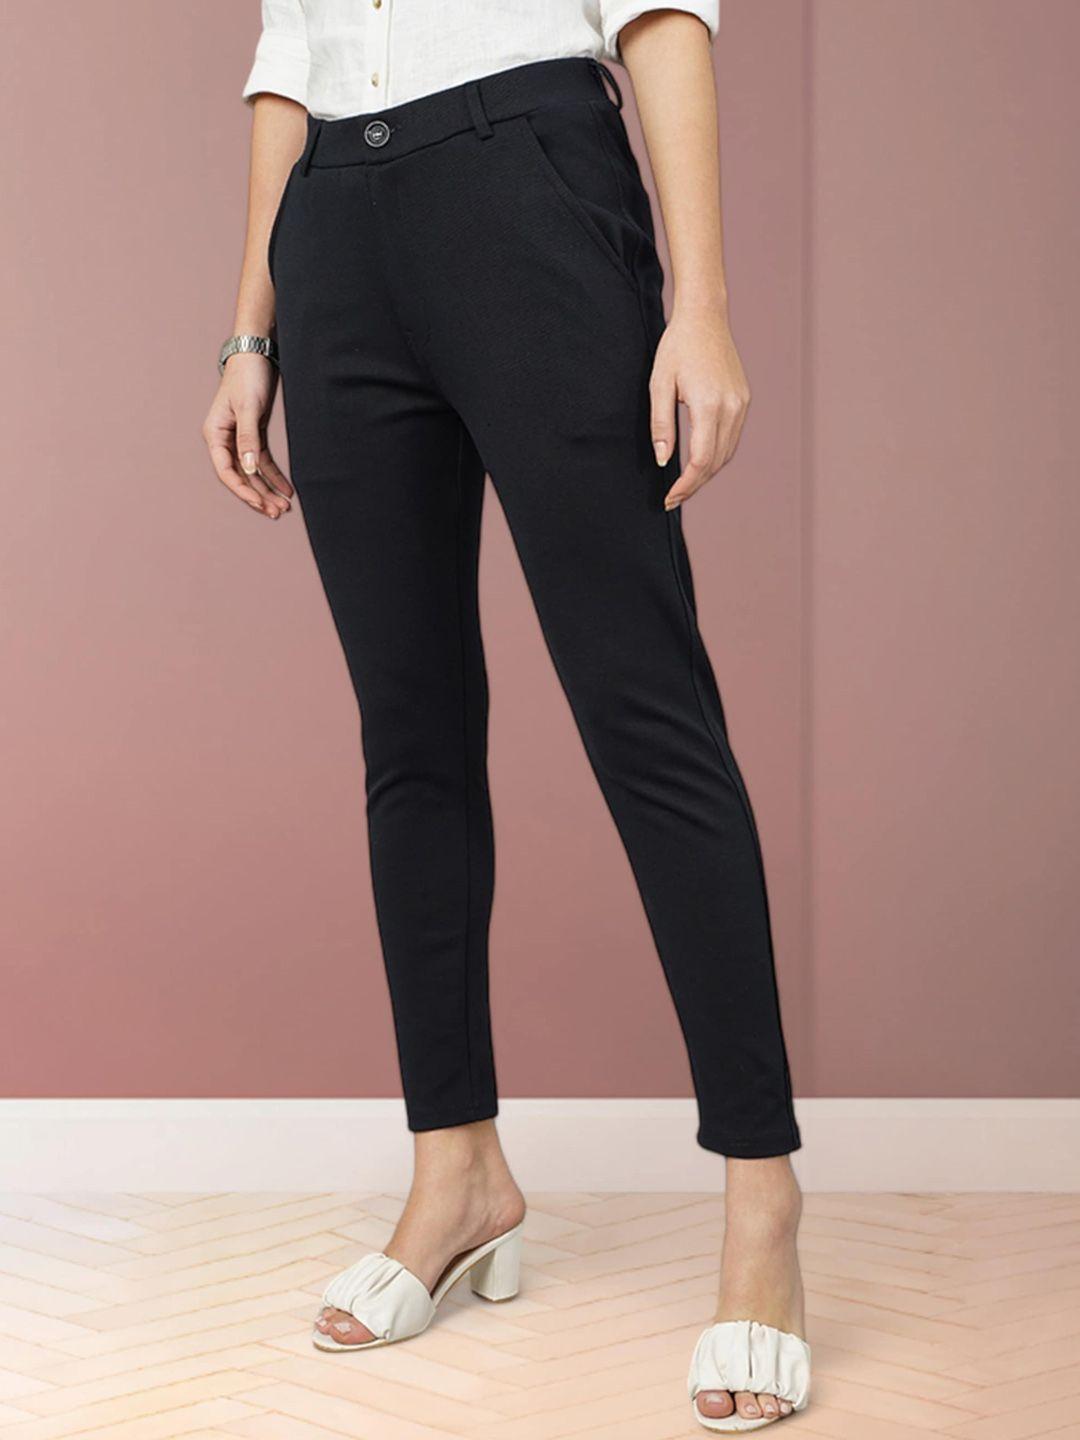 FITHUB Women Slim Fit High-Rise Trousers